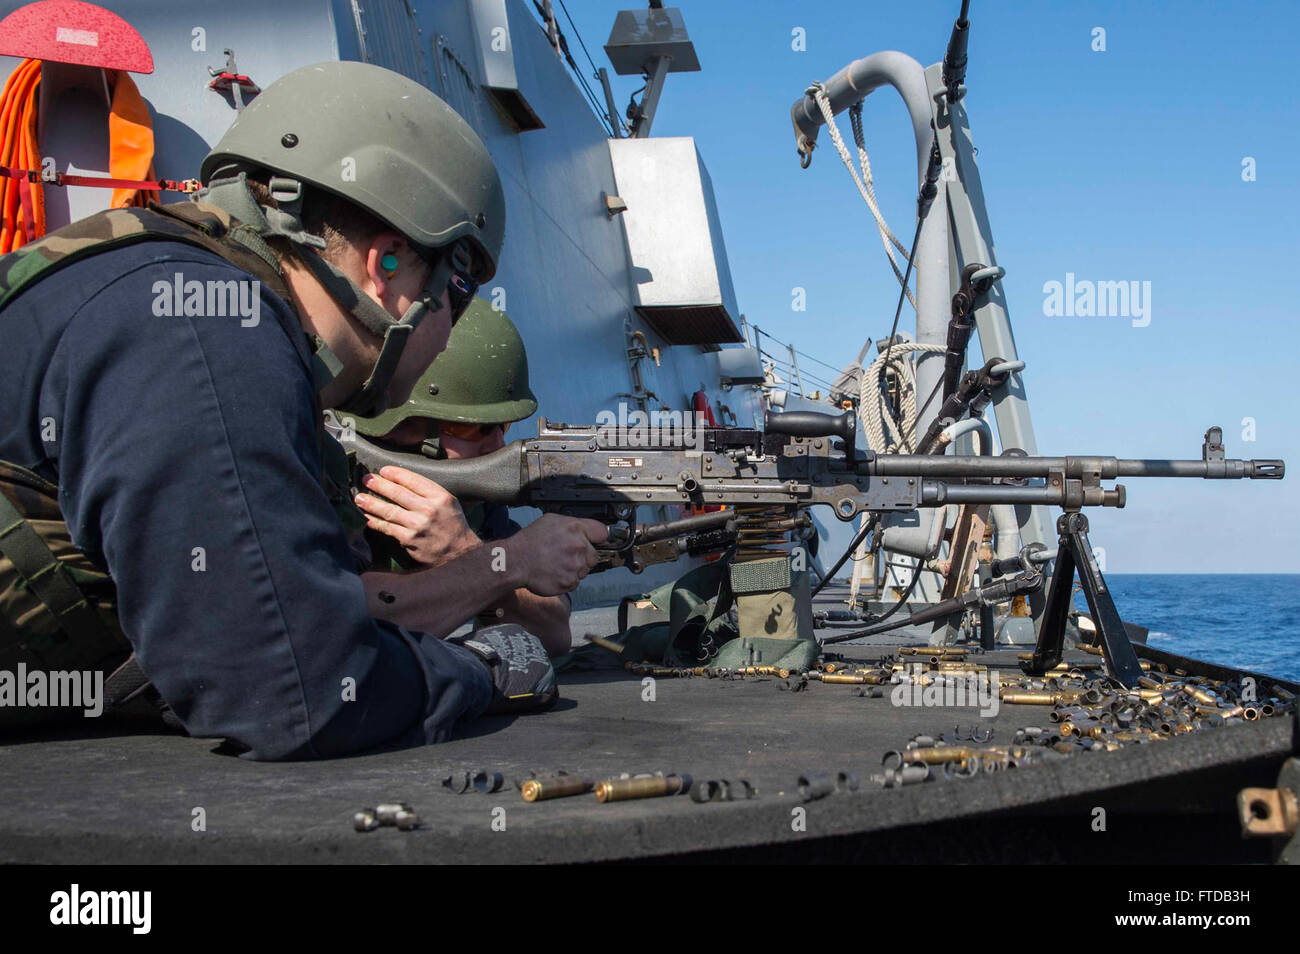 150403-N-VC236-140 MEDITERRANEAN SEA (April 3, 2015) - Gunner's Mate 2nd Class Alan Bishop, from Orlando, Florida, looks on as Operations Specialist Will Farmer, from Columbia, South Carolina, fires a M240 machine gun during a live-fire exercise aboard the Arleigh Burke-class guided-missile destroyer USS Farragut (DDG 99) April 3, 2015. Farragut, homeported in Mayport, Florida, is conducting naval operations in the U.S. 6th Fleet area of operations in support of U.S. national security interests in Europe. (U.S. Navy photo by Mass Communication Specialist 3rd Class Jackie Hart/Released) Stock Photo